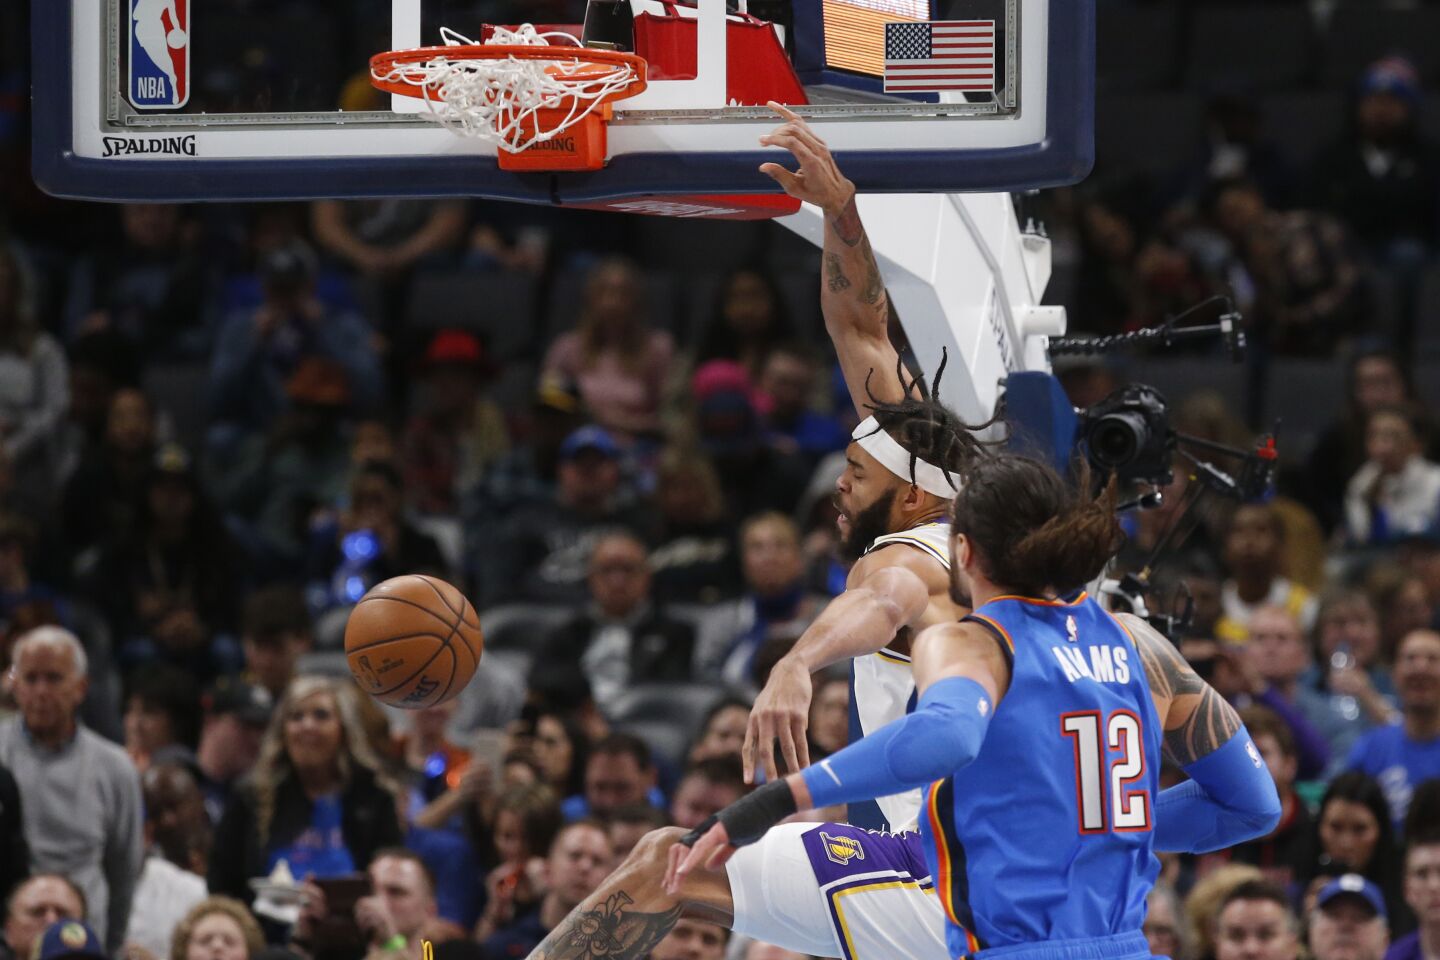 Lakers center JaVale McGee dunks in front of Thunder center Steven Adams (12) during the second half of a game Jan. 11.